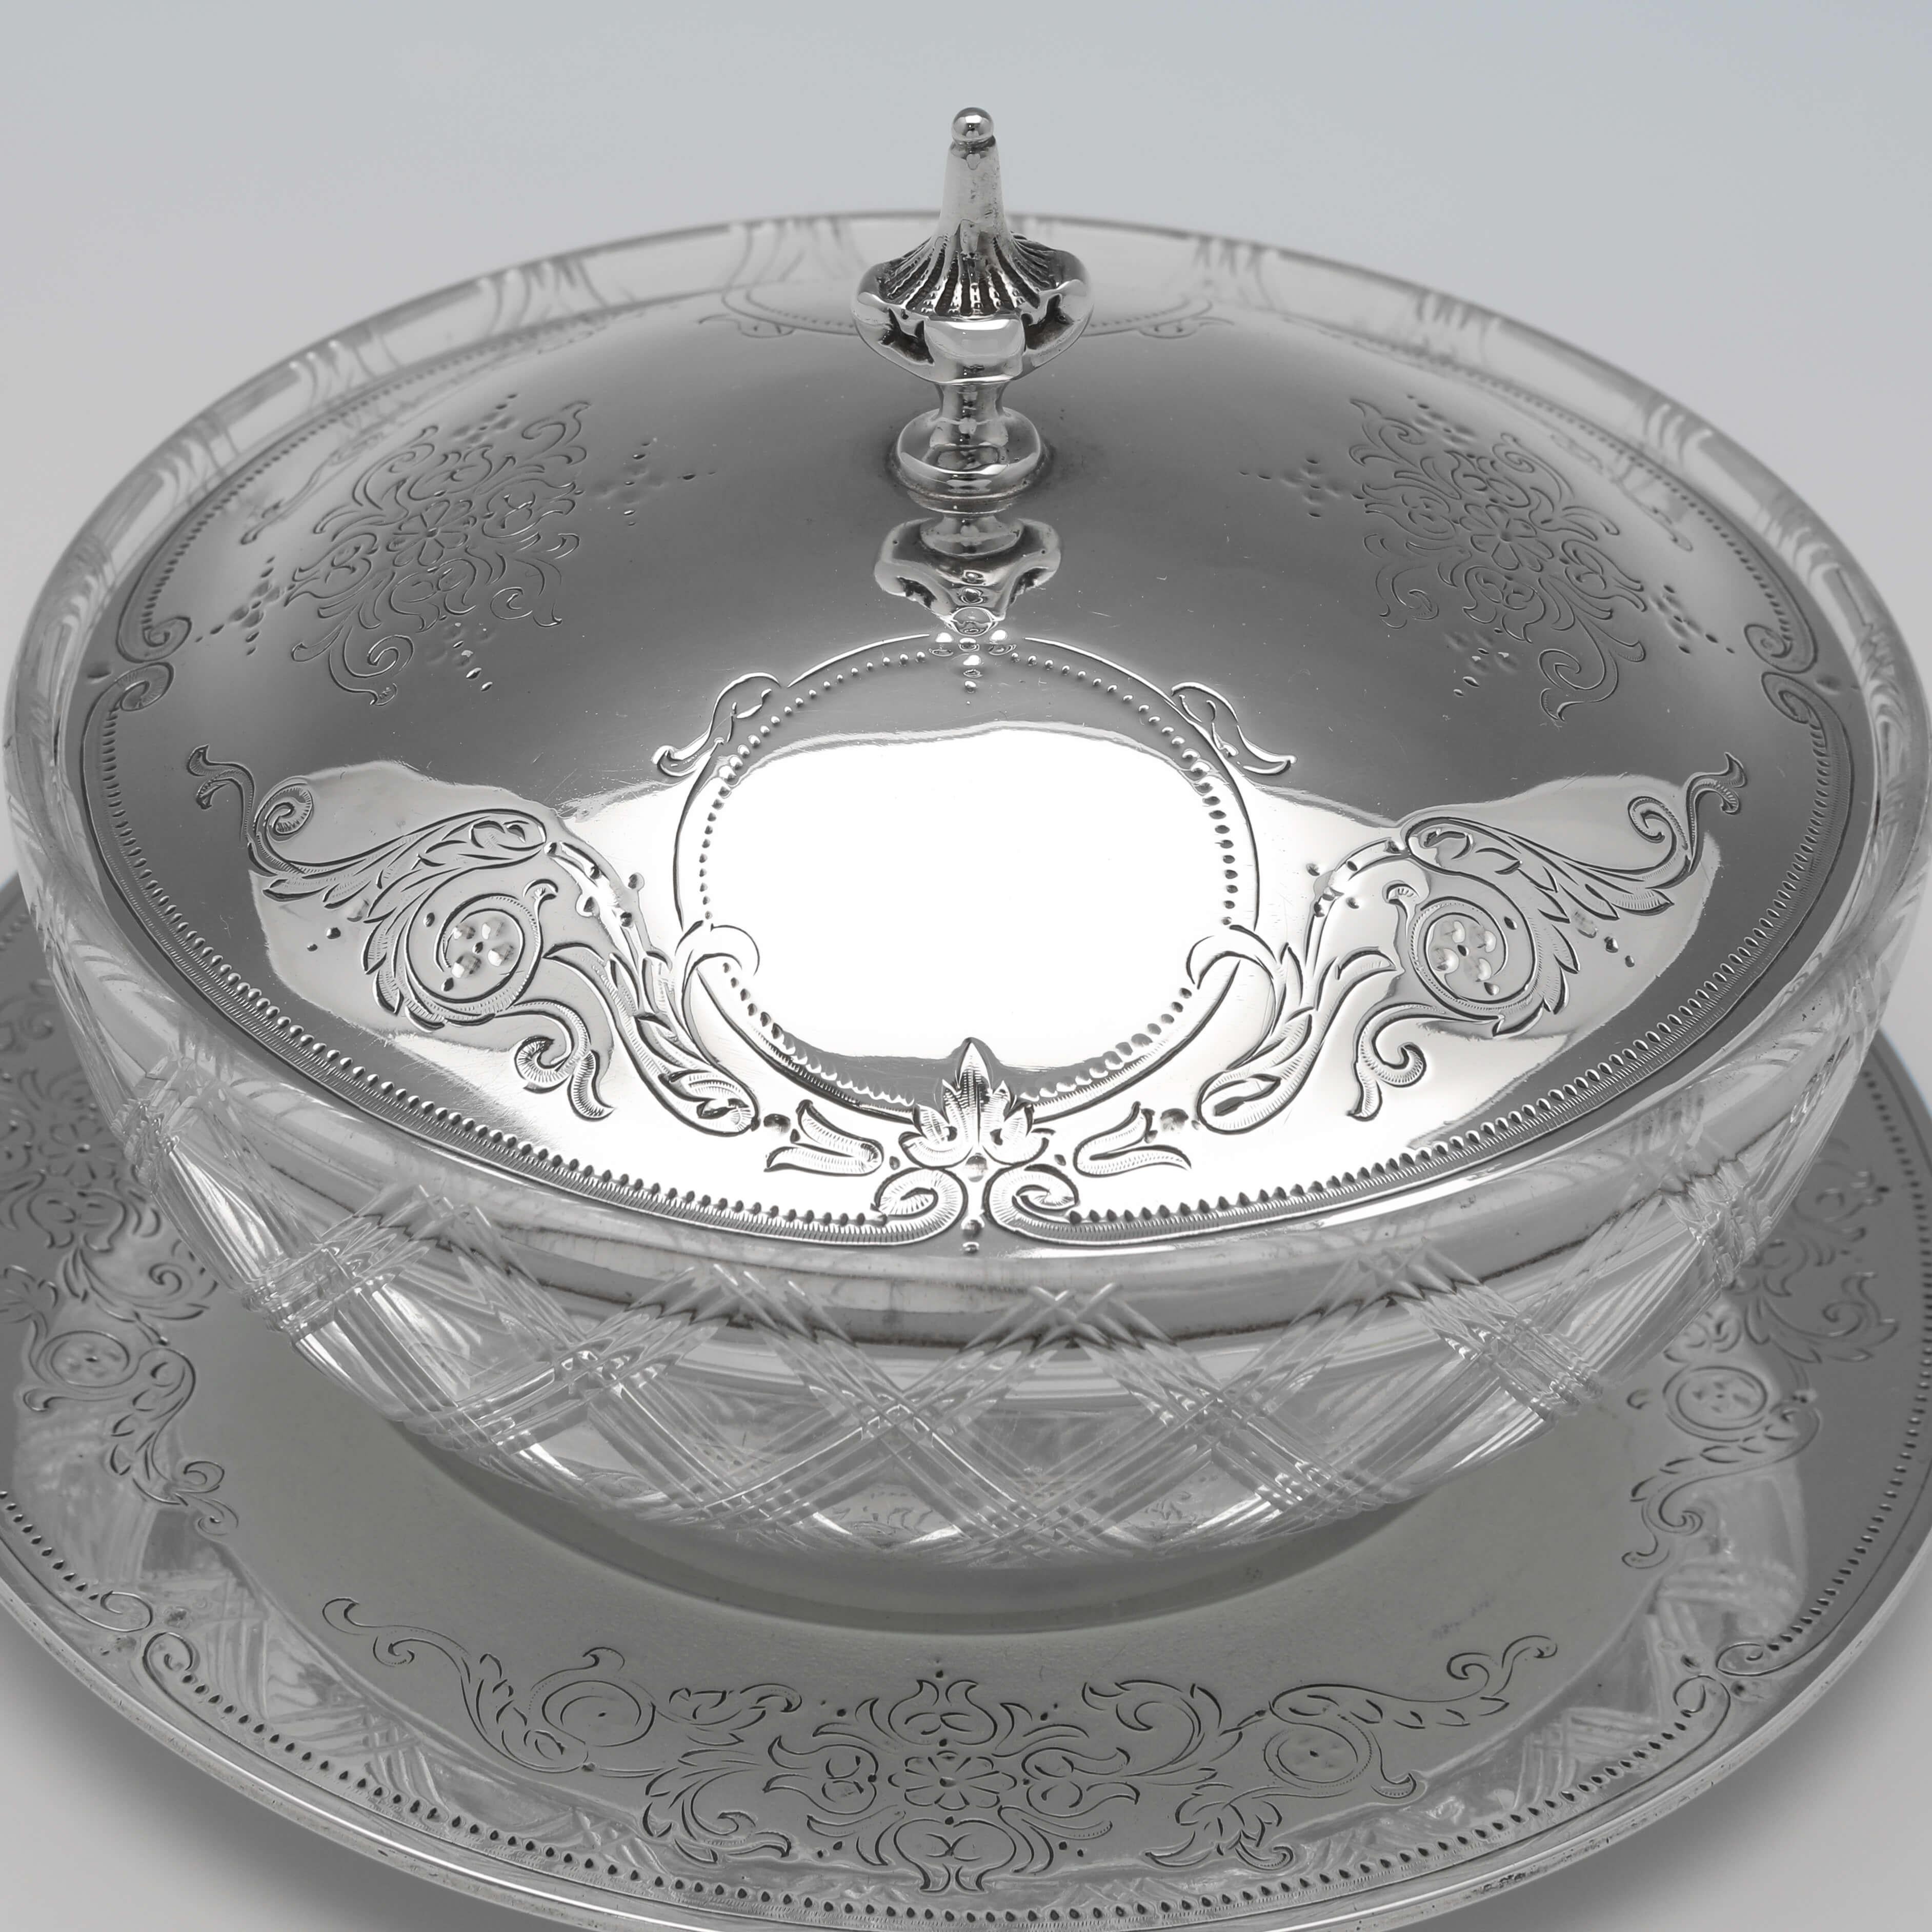 English Victorian Antique Glass & Sterling Silver Butter Dish London 1866 George Angell For Sale